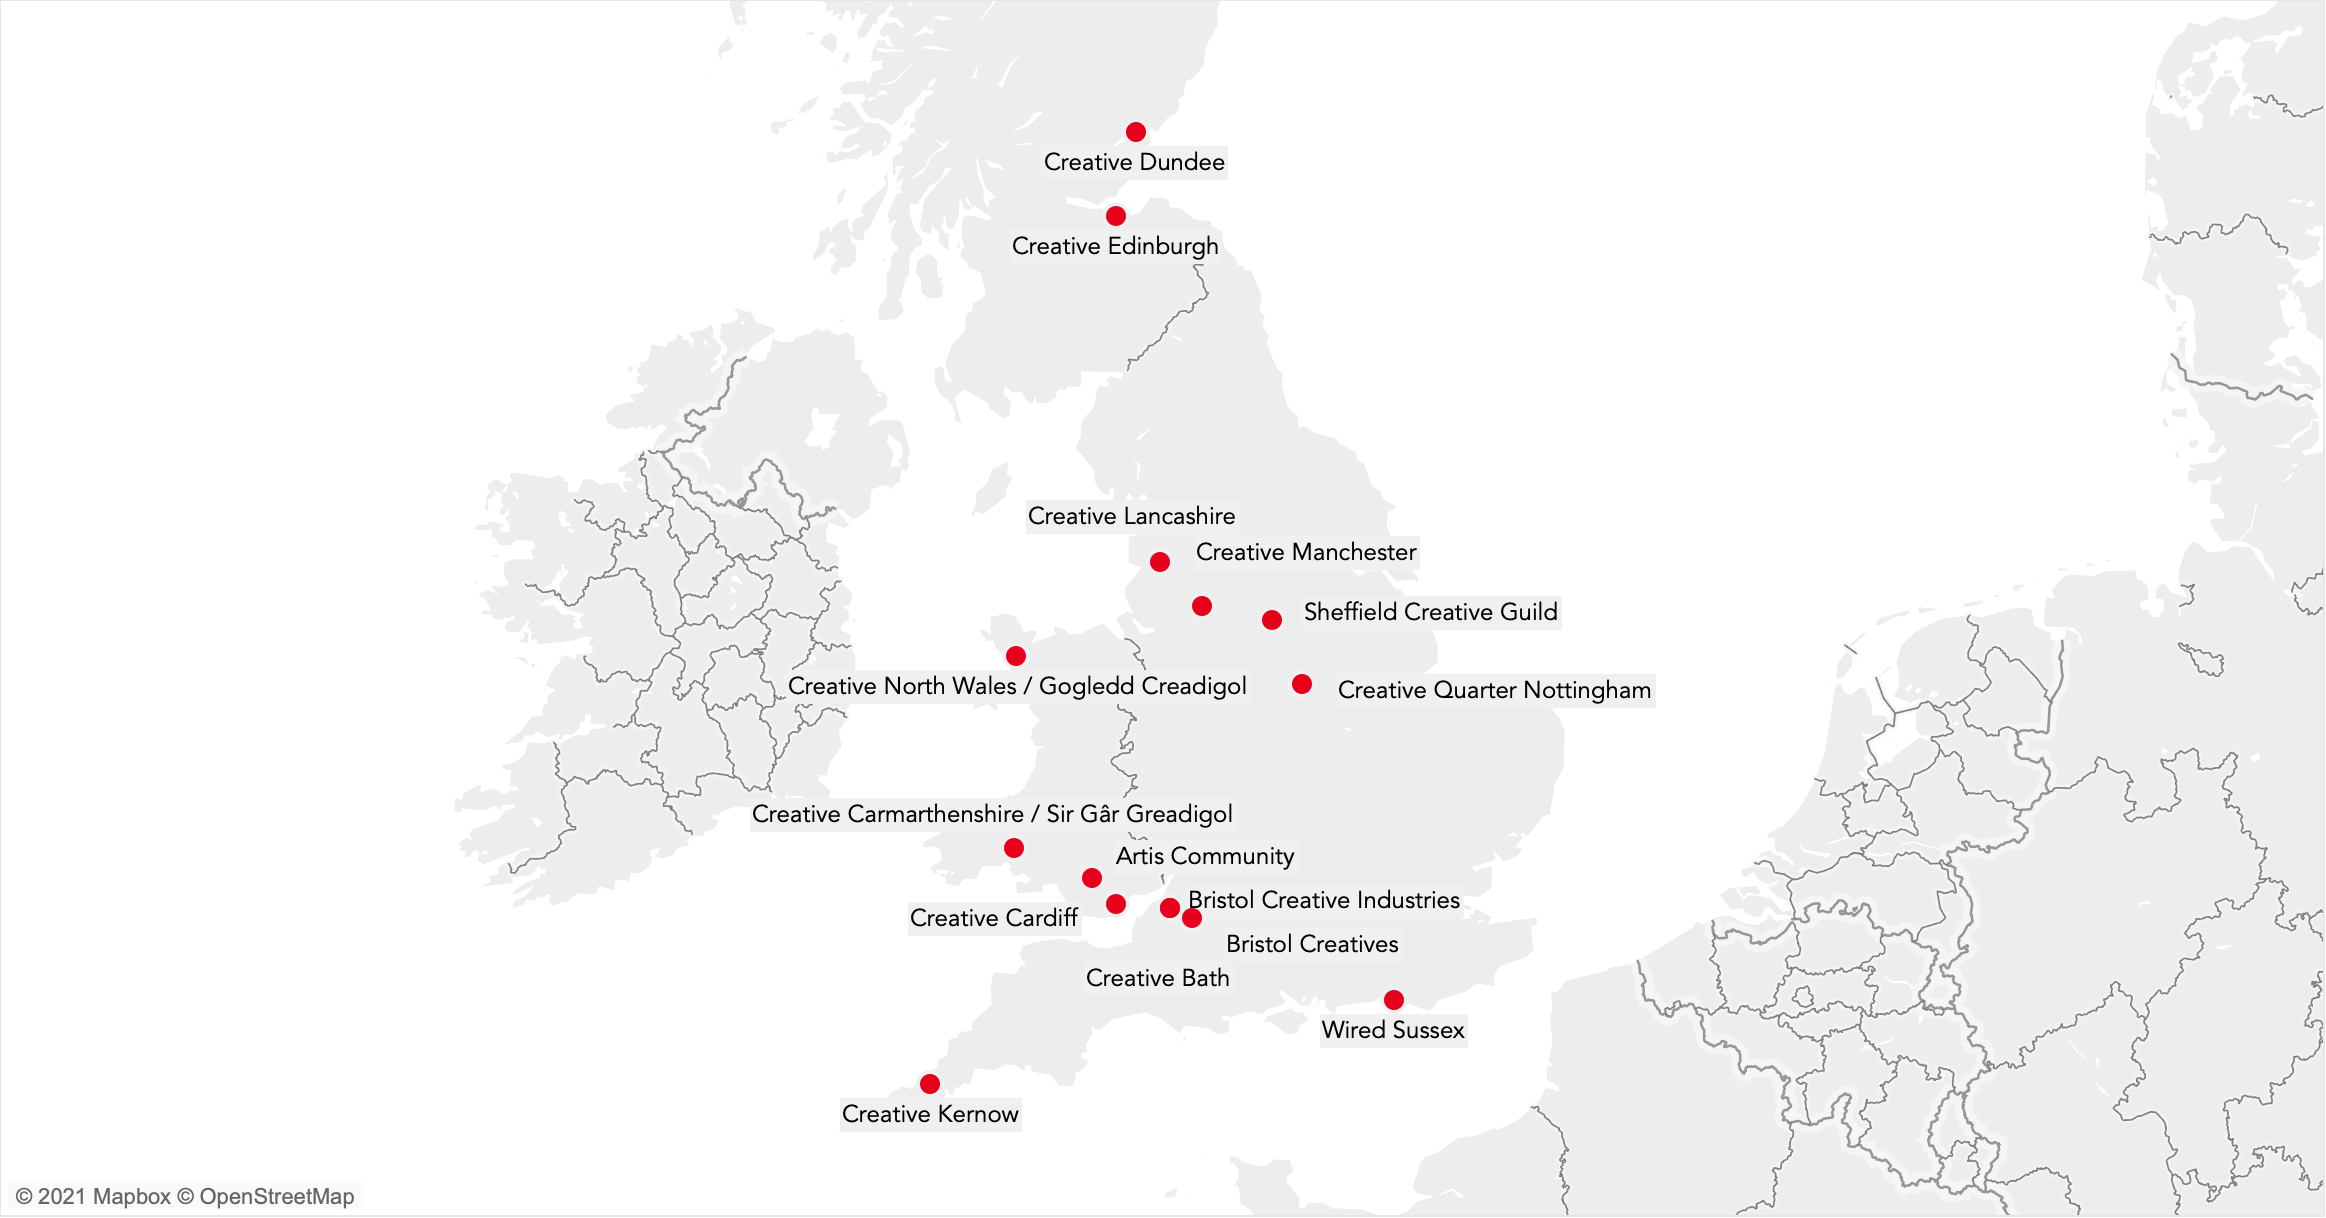 Map of UK creative networks